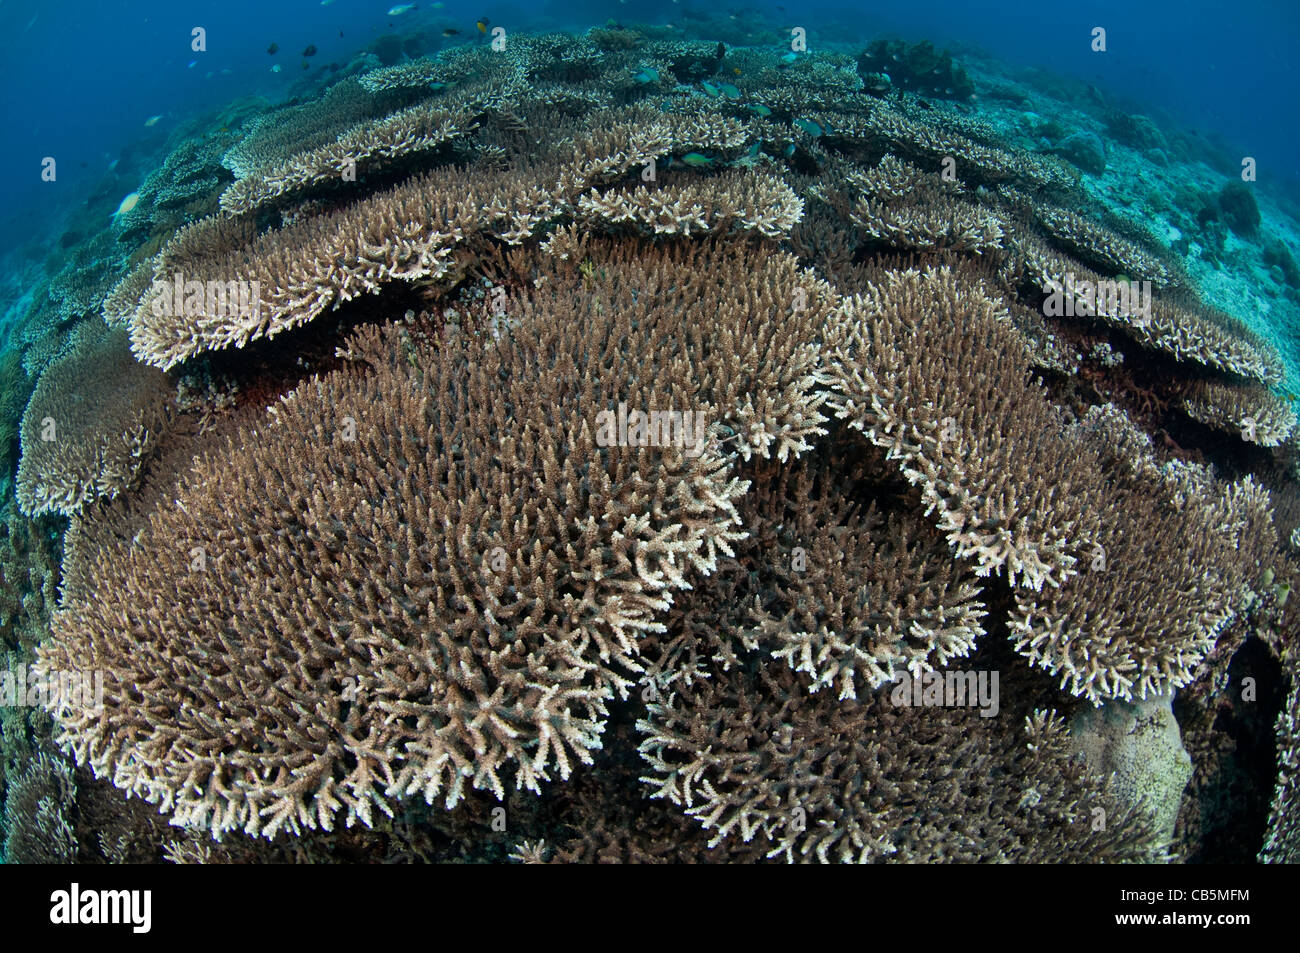 A hard coral garden, with a variety of table, leather, and staghorn corals, Lembeh Strait, North Sulawesi Indonesia Stock Photo